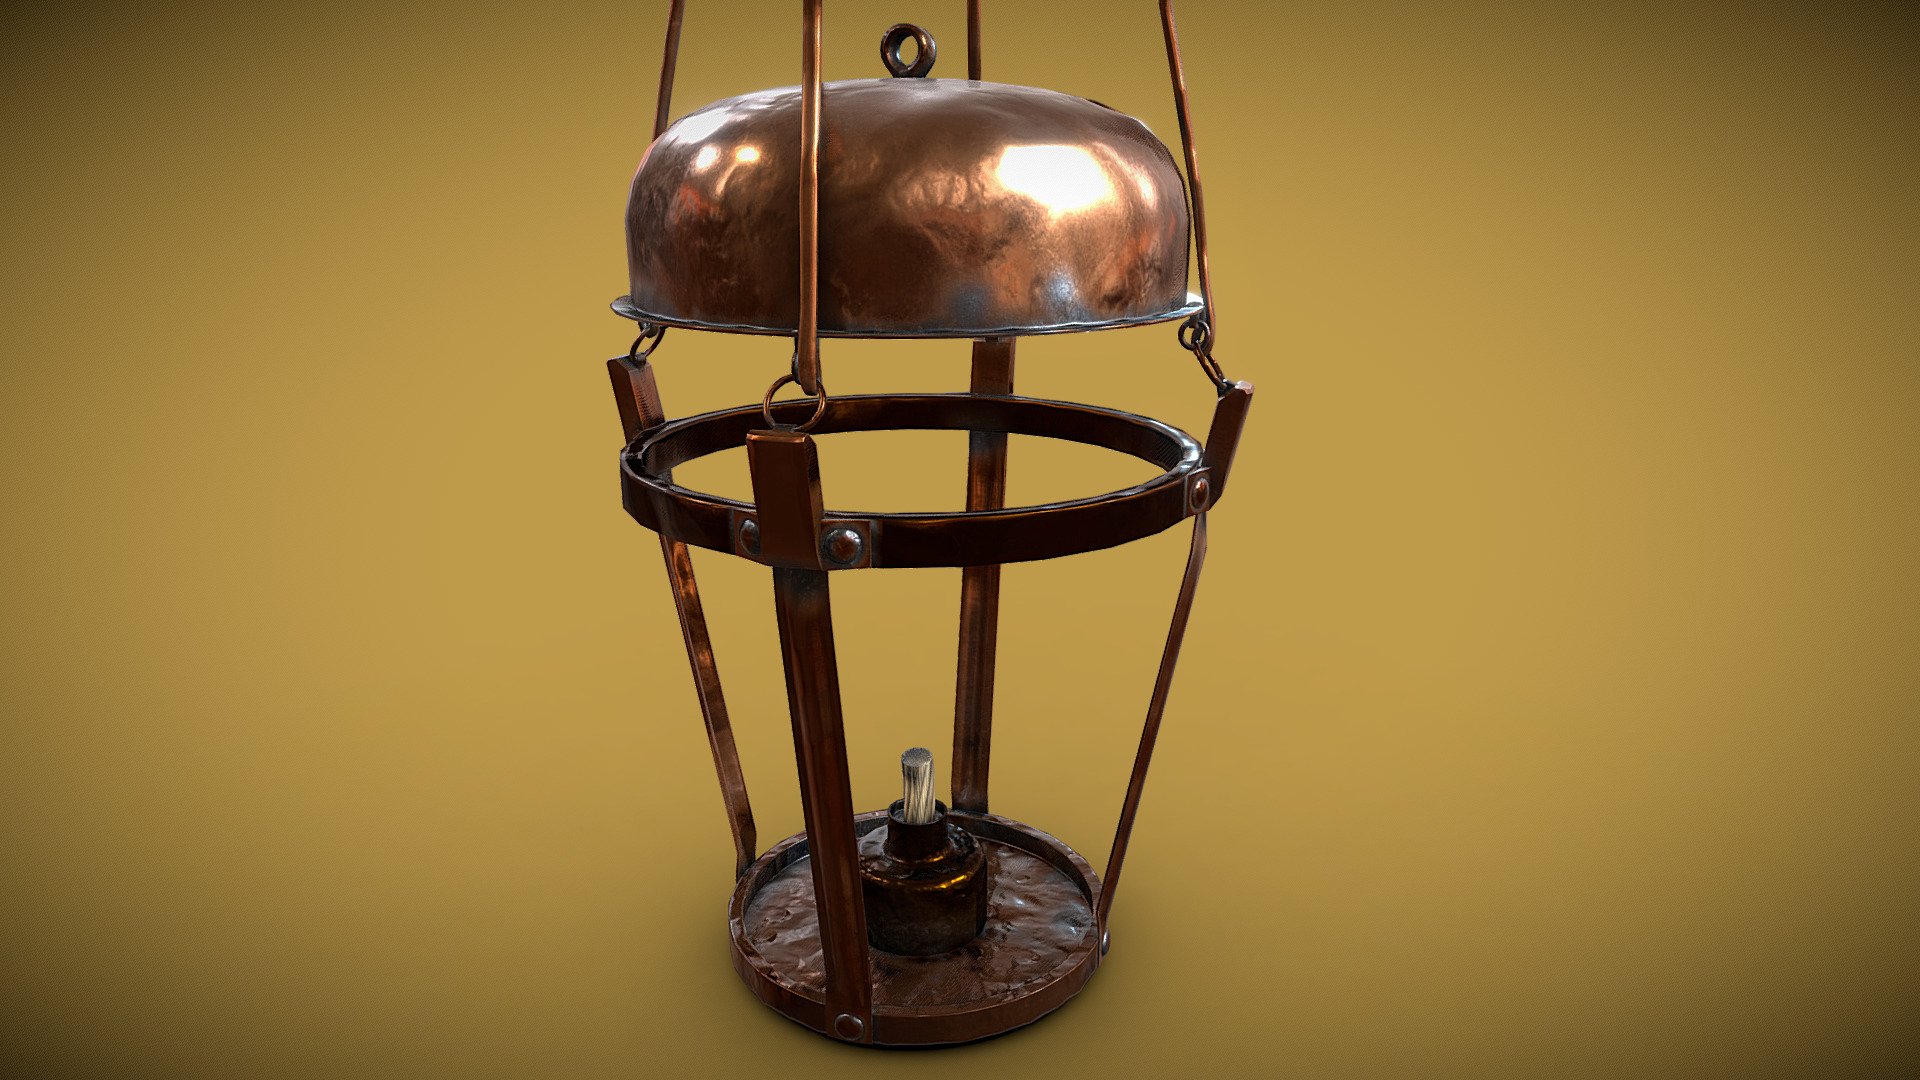 Step back in time with this Early Bronze Roman Oil Lamp, an ancient artifact that will transport you to the ancient Roman Empire. This functional lamp is a must-have for history buffs and gamers alike who want to experience ancient Roman culture in a fun and immersive way. Perfect for use in games and virtual reality experiences, this lamp adds a touch of authenticity to any historical reenactment or adventure 3d model